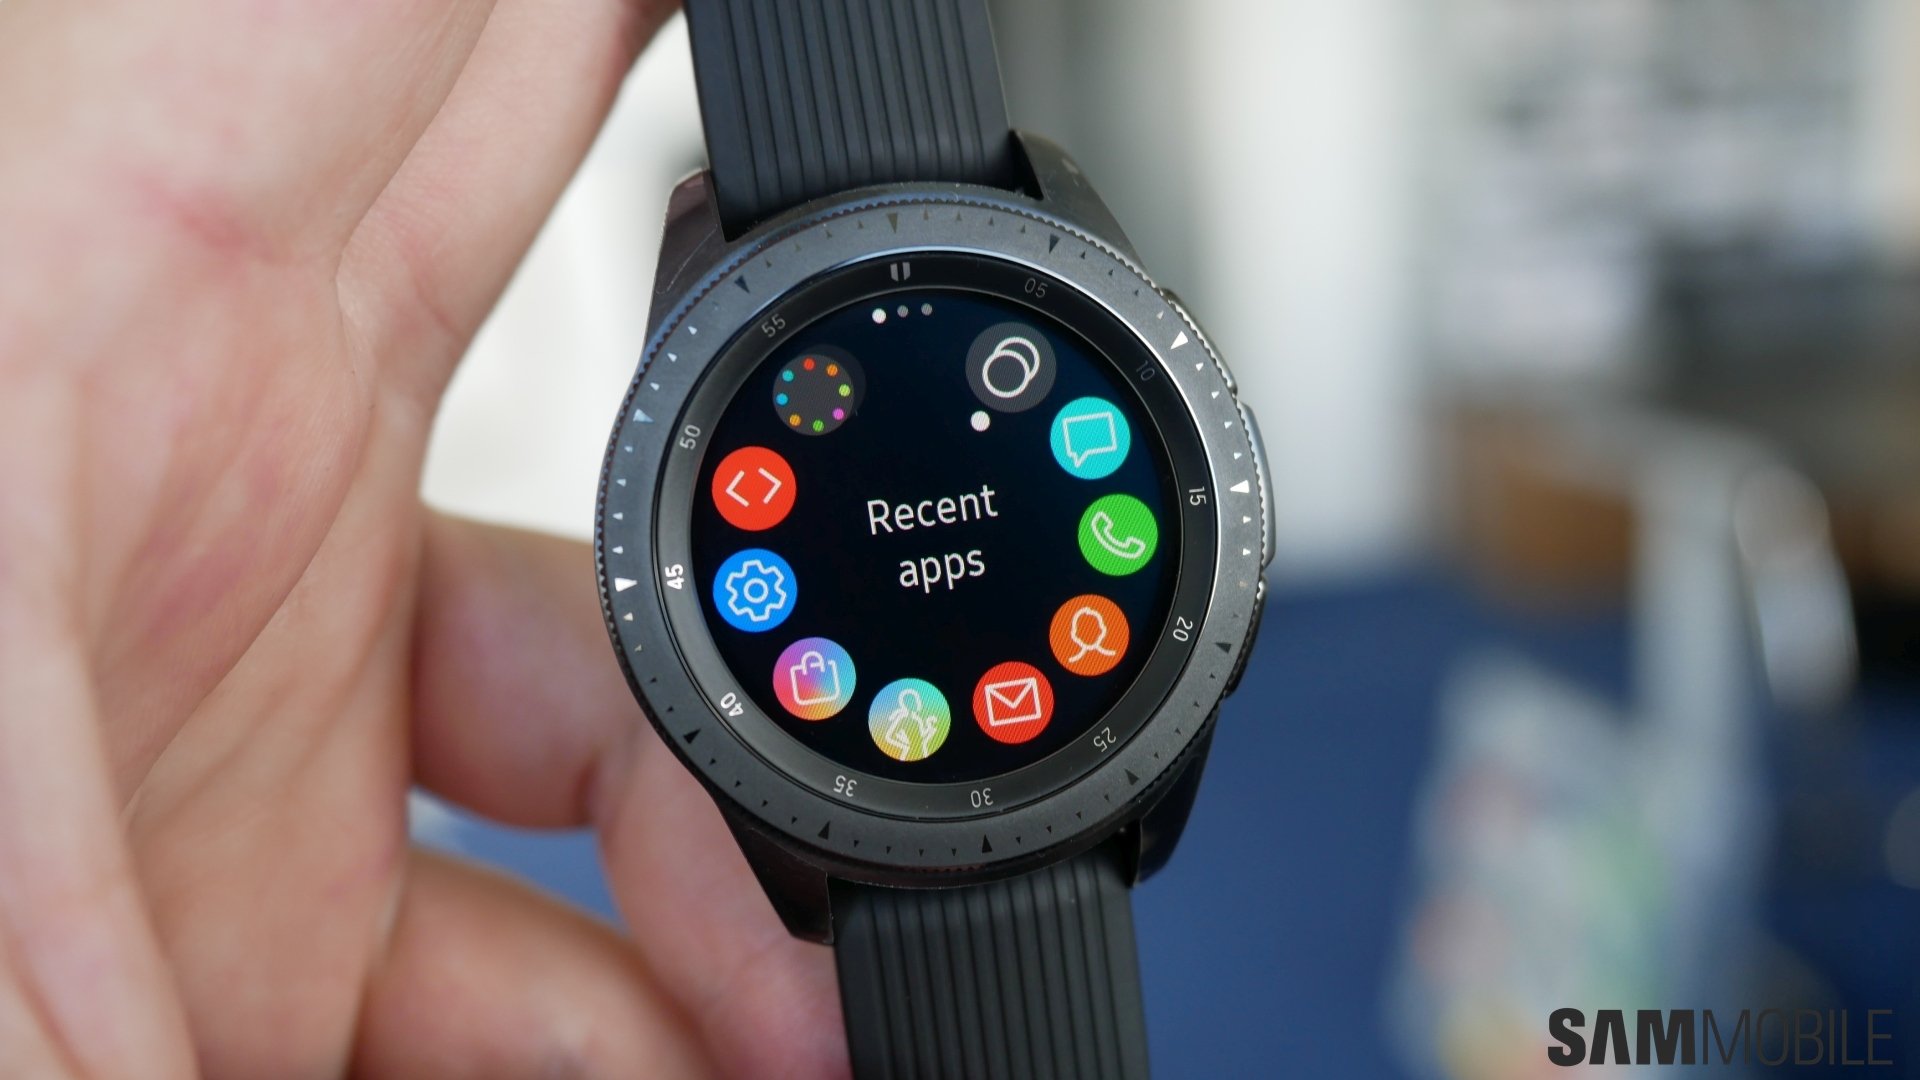 Can my Galaxy Watch find my phone? Of 